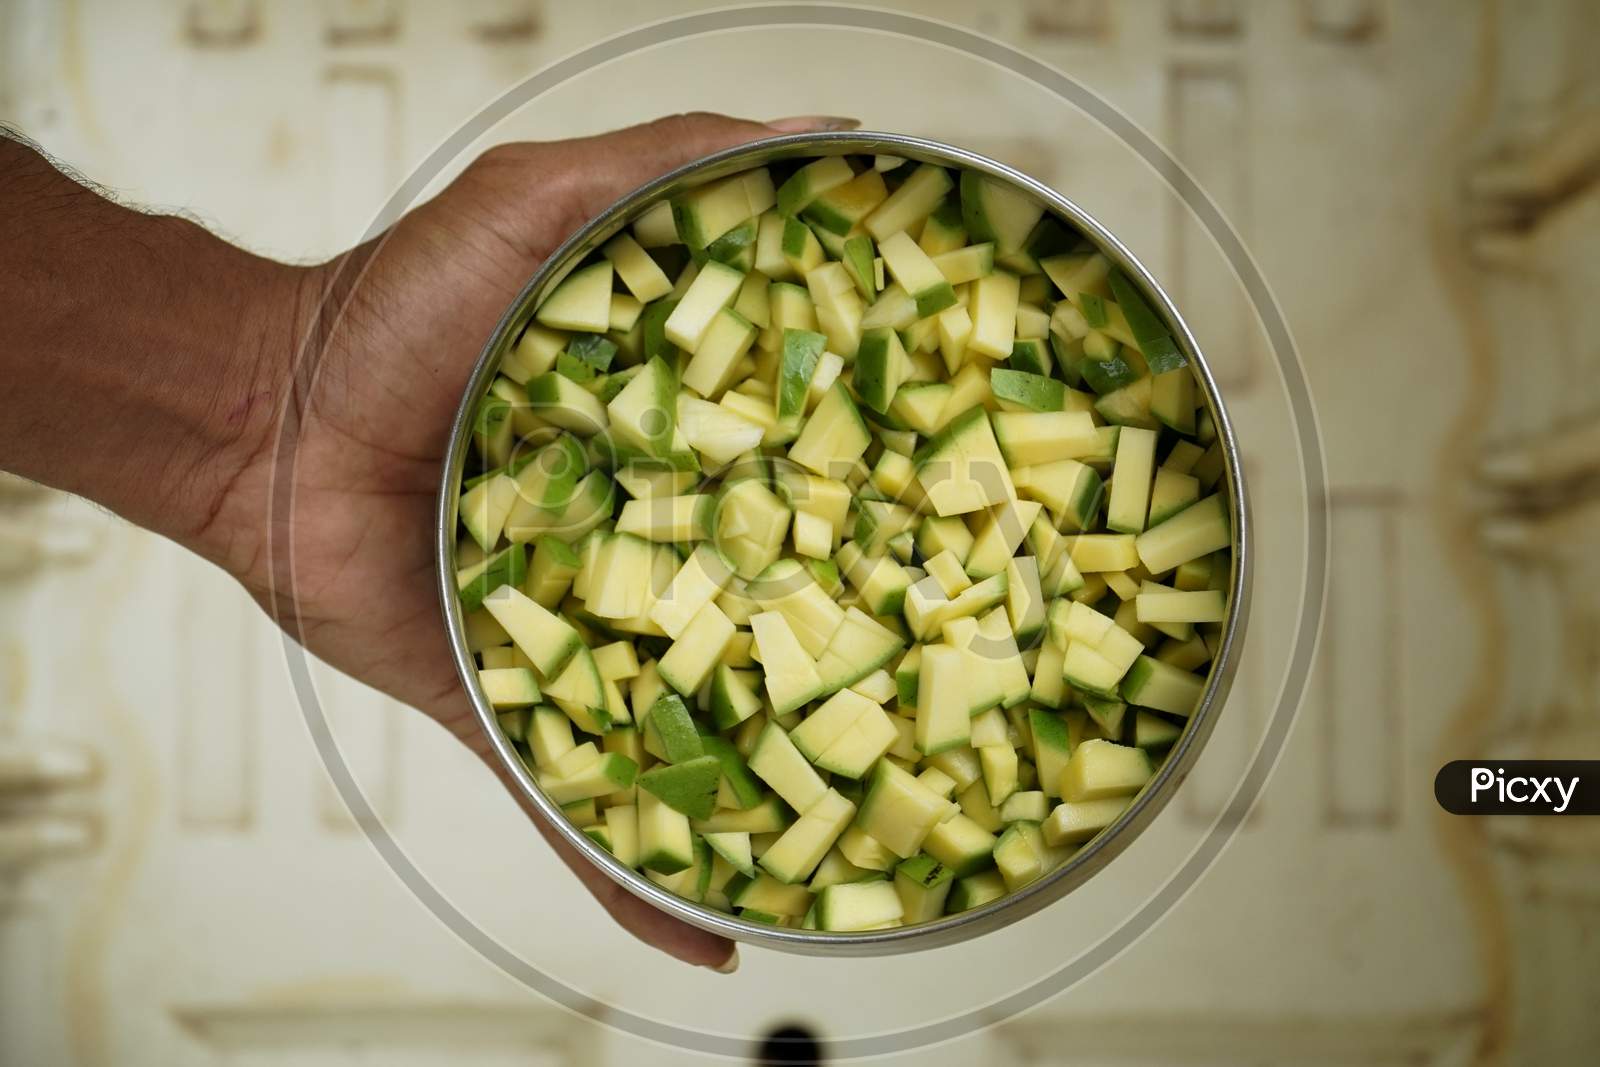 Close Up Image Of Fresh Chopped Green Mango Pieces For Cooking In A Stainless Steel Bowl.